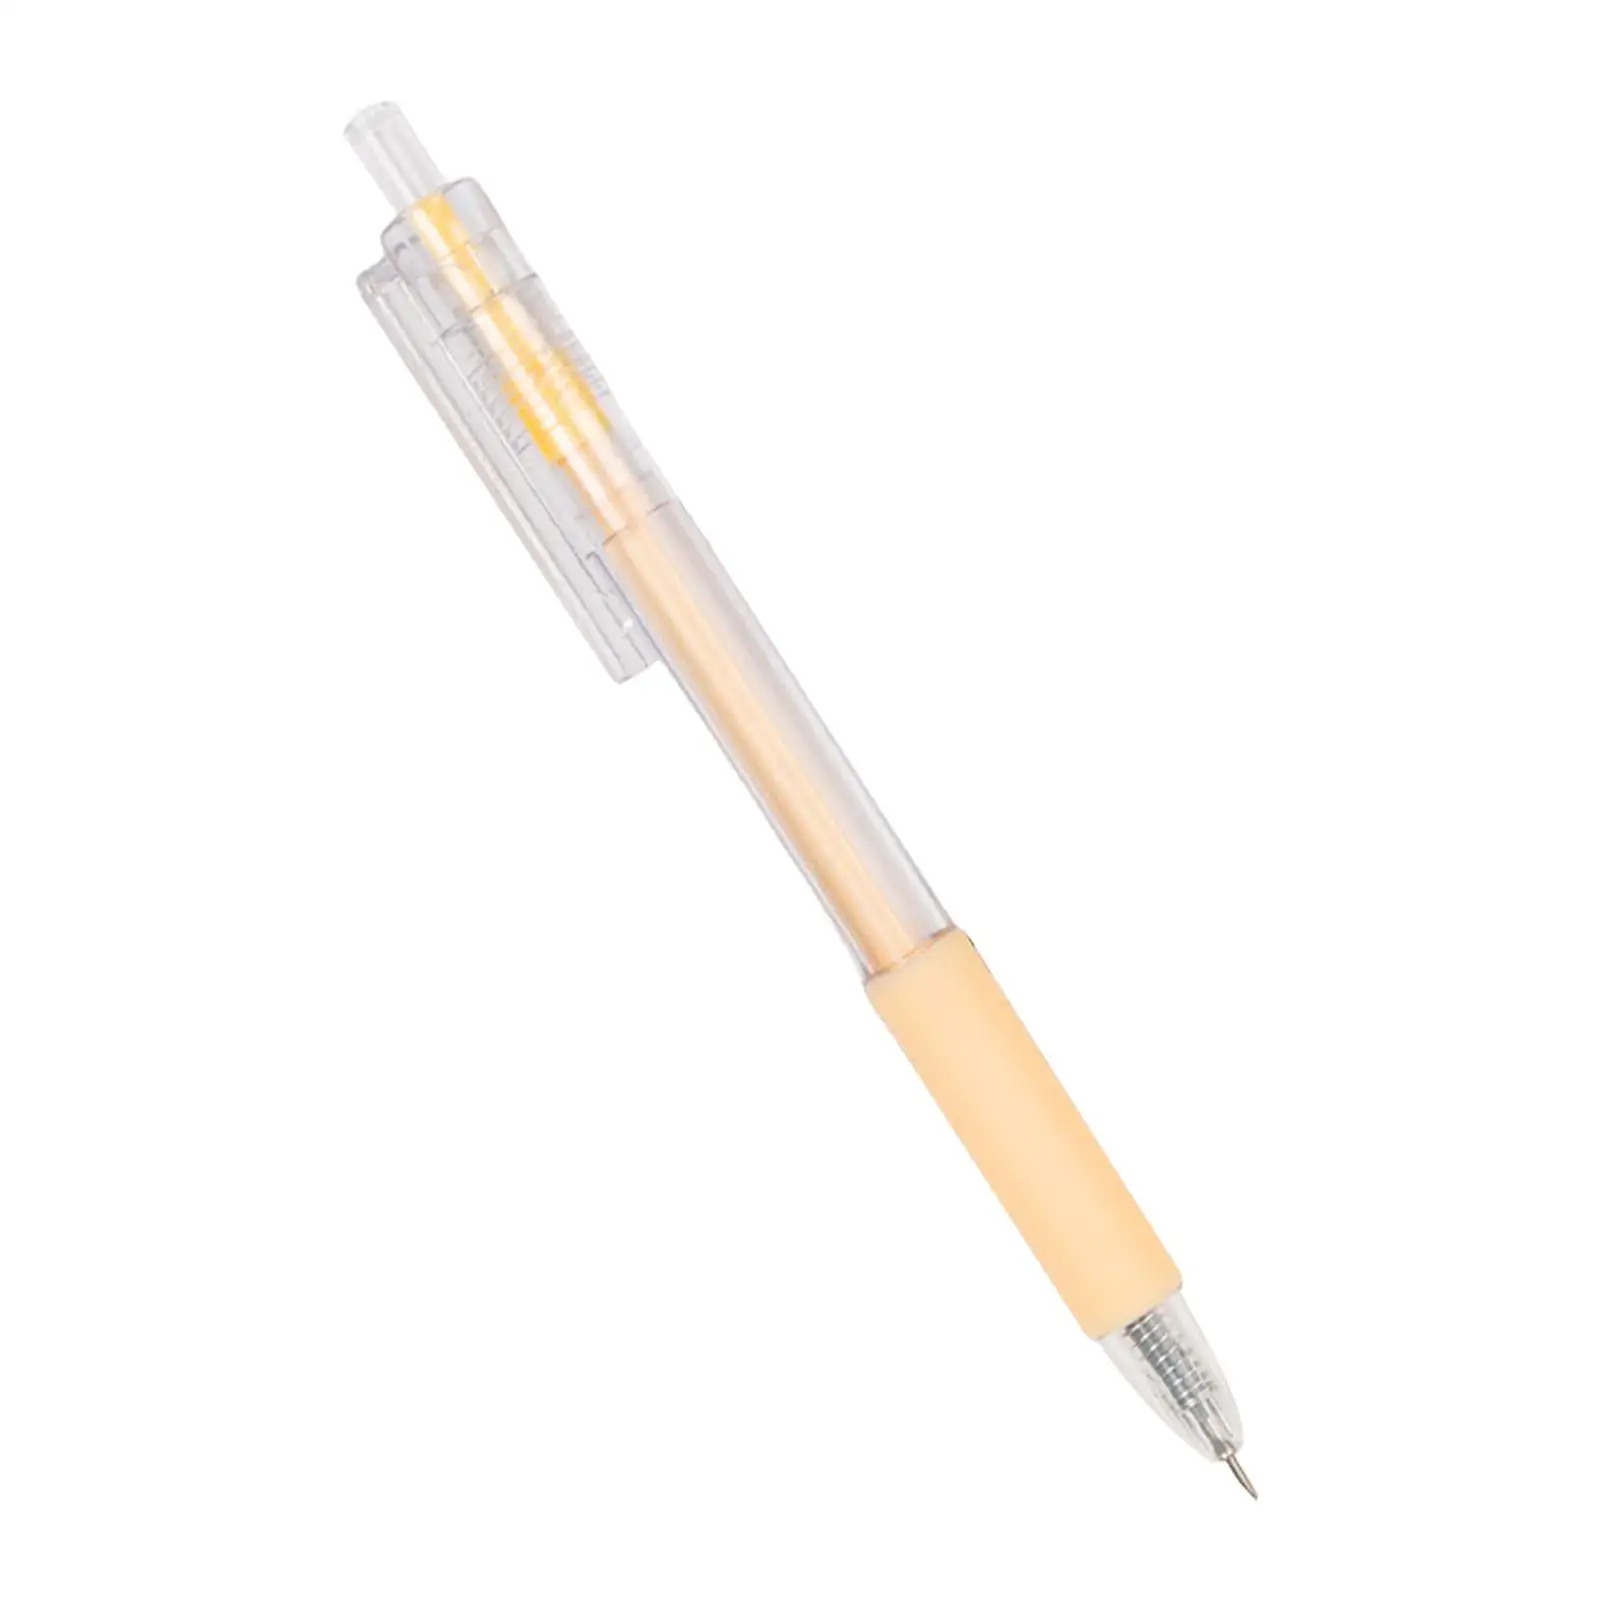 Portable Paper Cutter Pens Utility Retractable for Stencil Making Projects Washi Tape Cutter Card Making Artist Sticker